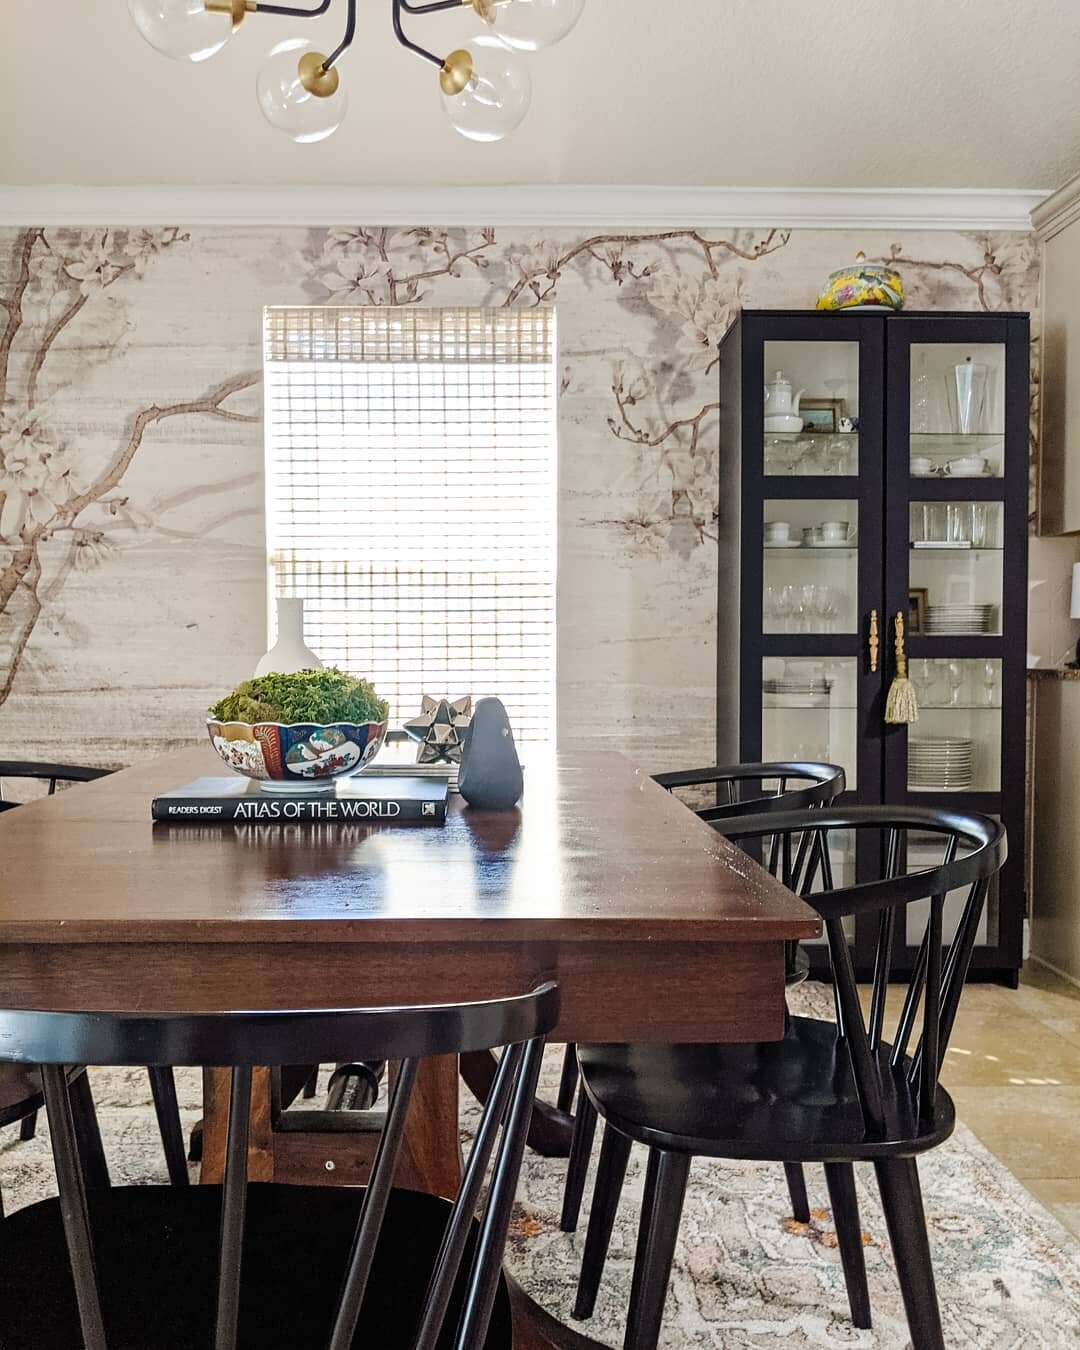 I struggled decorating the dining room a lot over the years. Decorating an open floor plan proved to be a little more difficult than I anticipated! I think I finally cracked it though! Our dining room completely transformed when we installed this mur